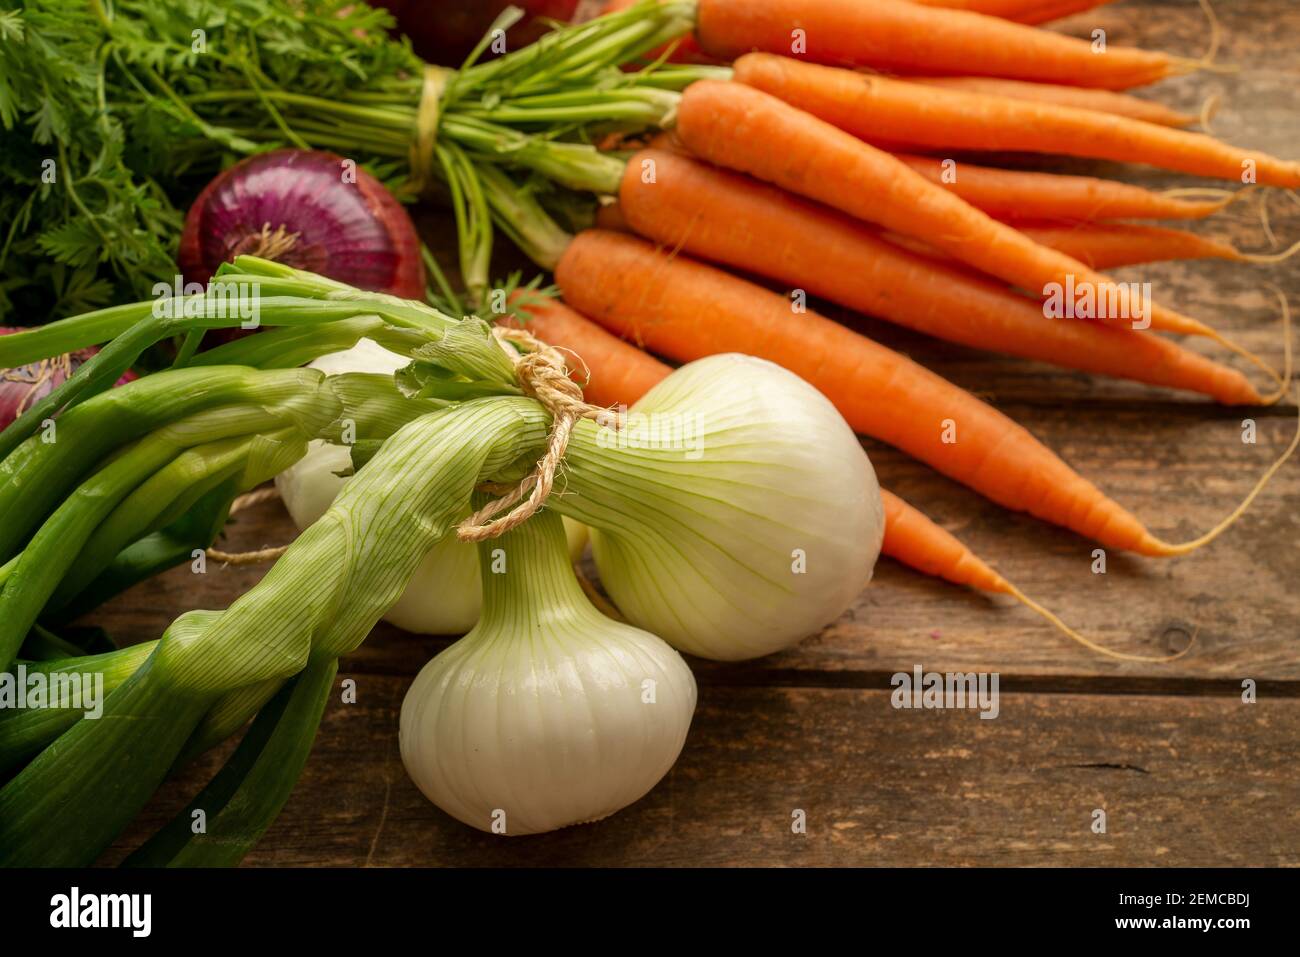 Fresh carrots bunch on rustic wooden background. Red onions on rustic wood. Different onions on wood. White onion on wood. Stock Photo